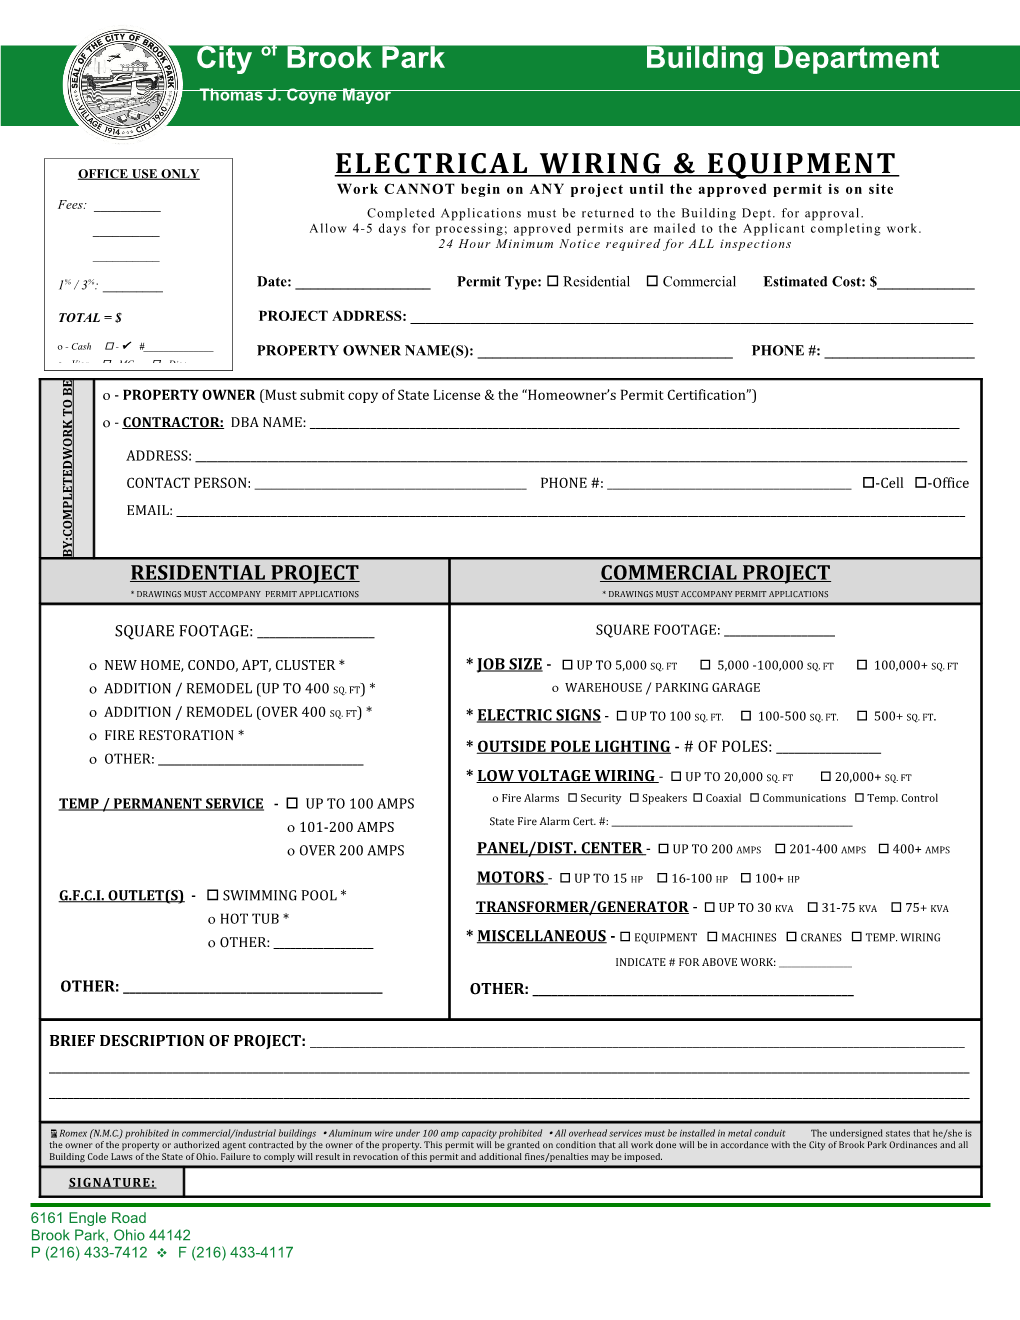 Electrical Wiring & Equipment